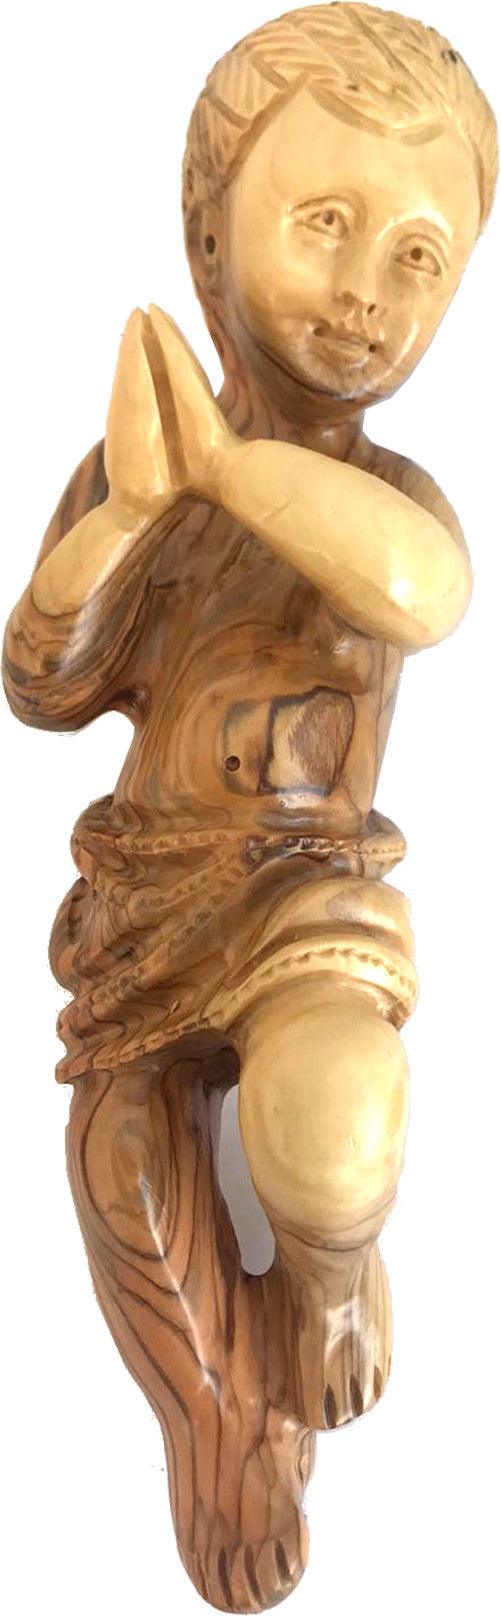 Baby Jesus in Cradle - Olive wood (27 cm or 10.5 Inches Baby Jesus)